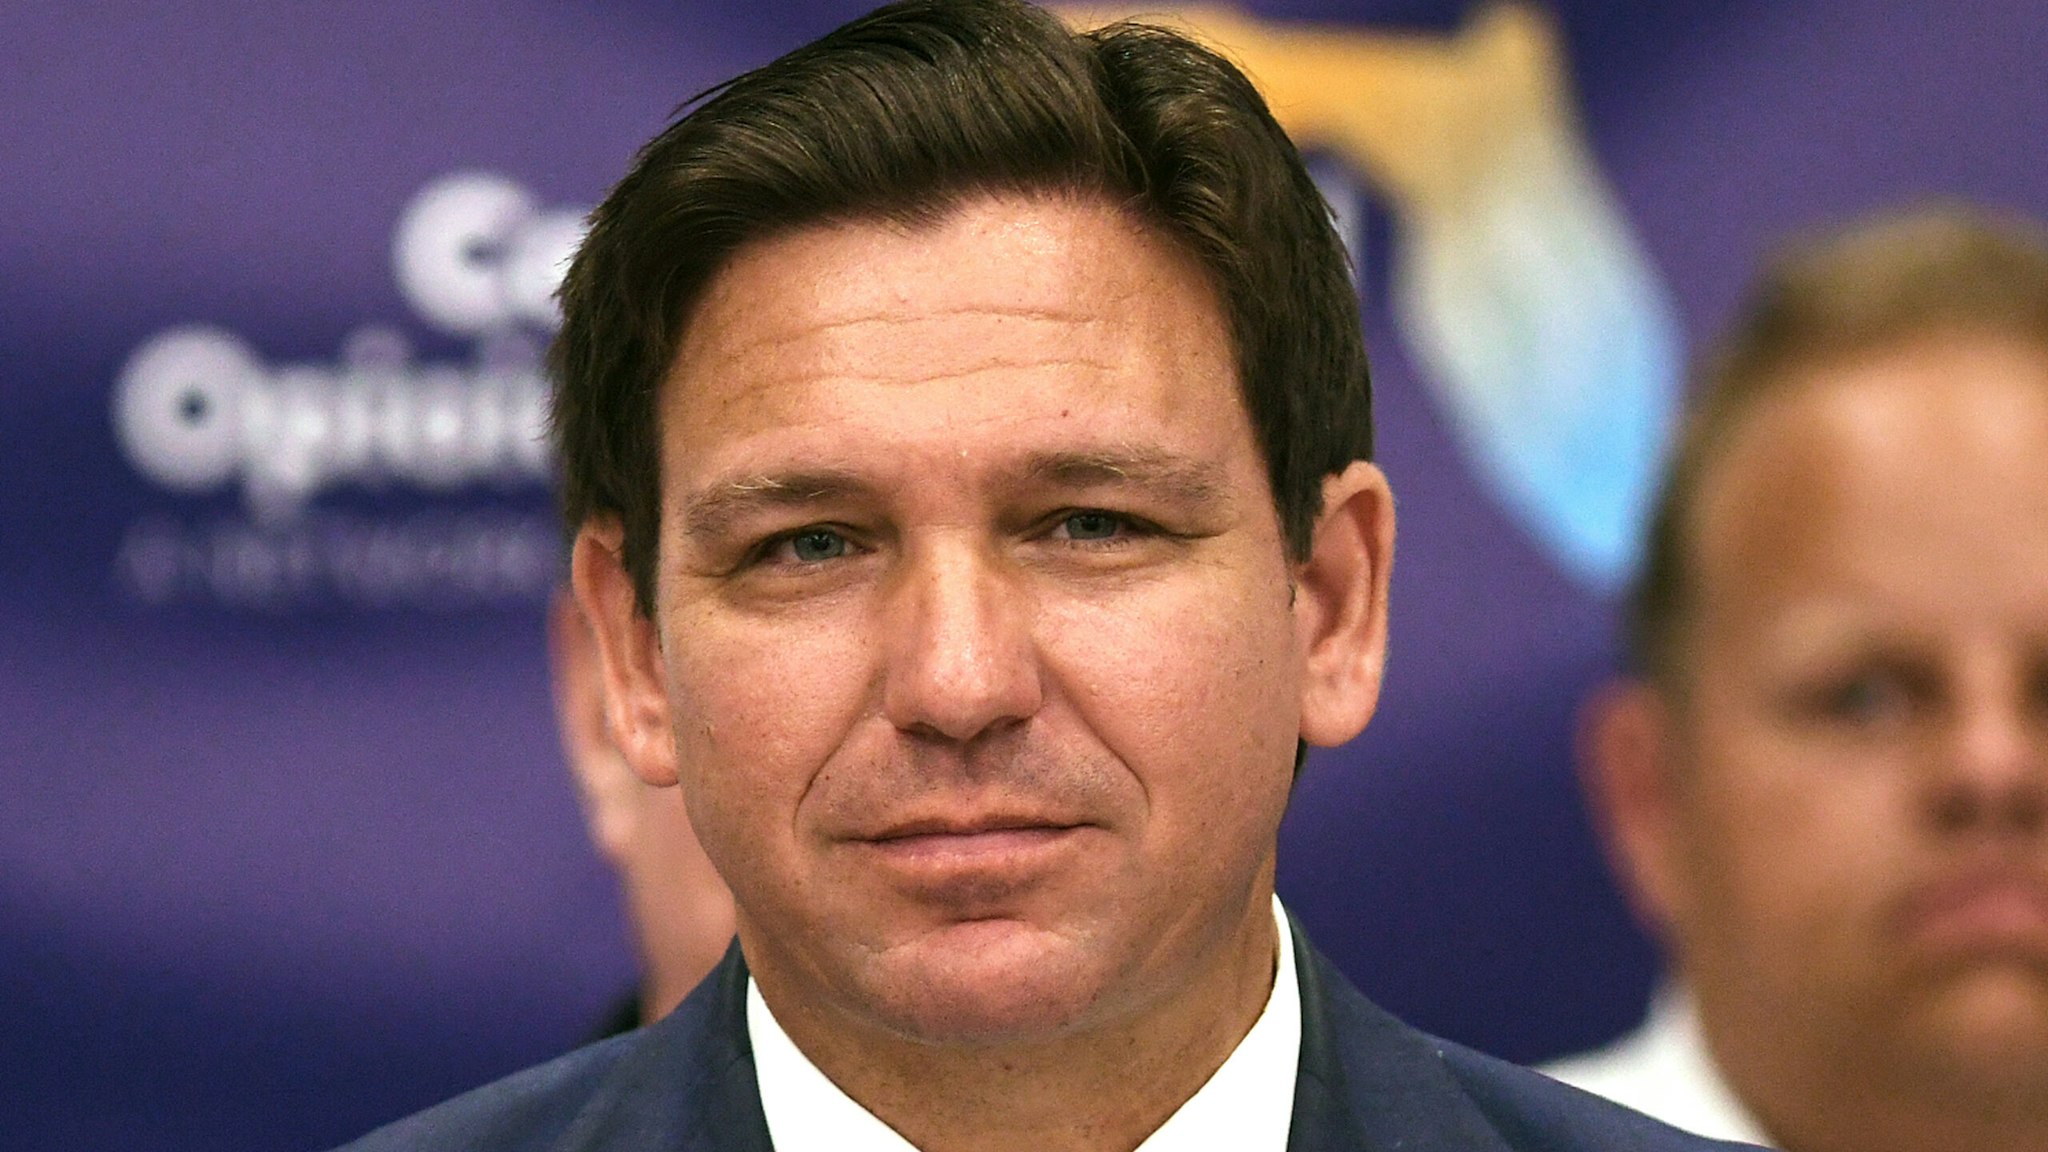 ROCKLEDGE, UNITED STATES - 2022/08/03: Florida Gov. Ron DeSantis speaks at a press conference to announce the expansion of a new, piloted substance abuse and recovery network to disrupt the opioid epidemic, at the Space Coast Health Foundation in Rockledge, Florida. The Coordinated Opioid Recovery (CORE) network of addiction care was piloted in Palm Beach County and will be expanding in up to twelve counties to assist Floridians battling with addiction.